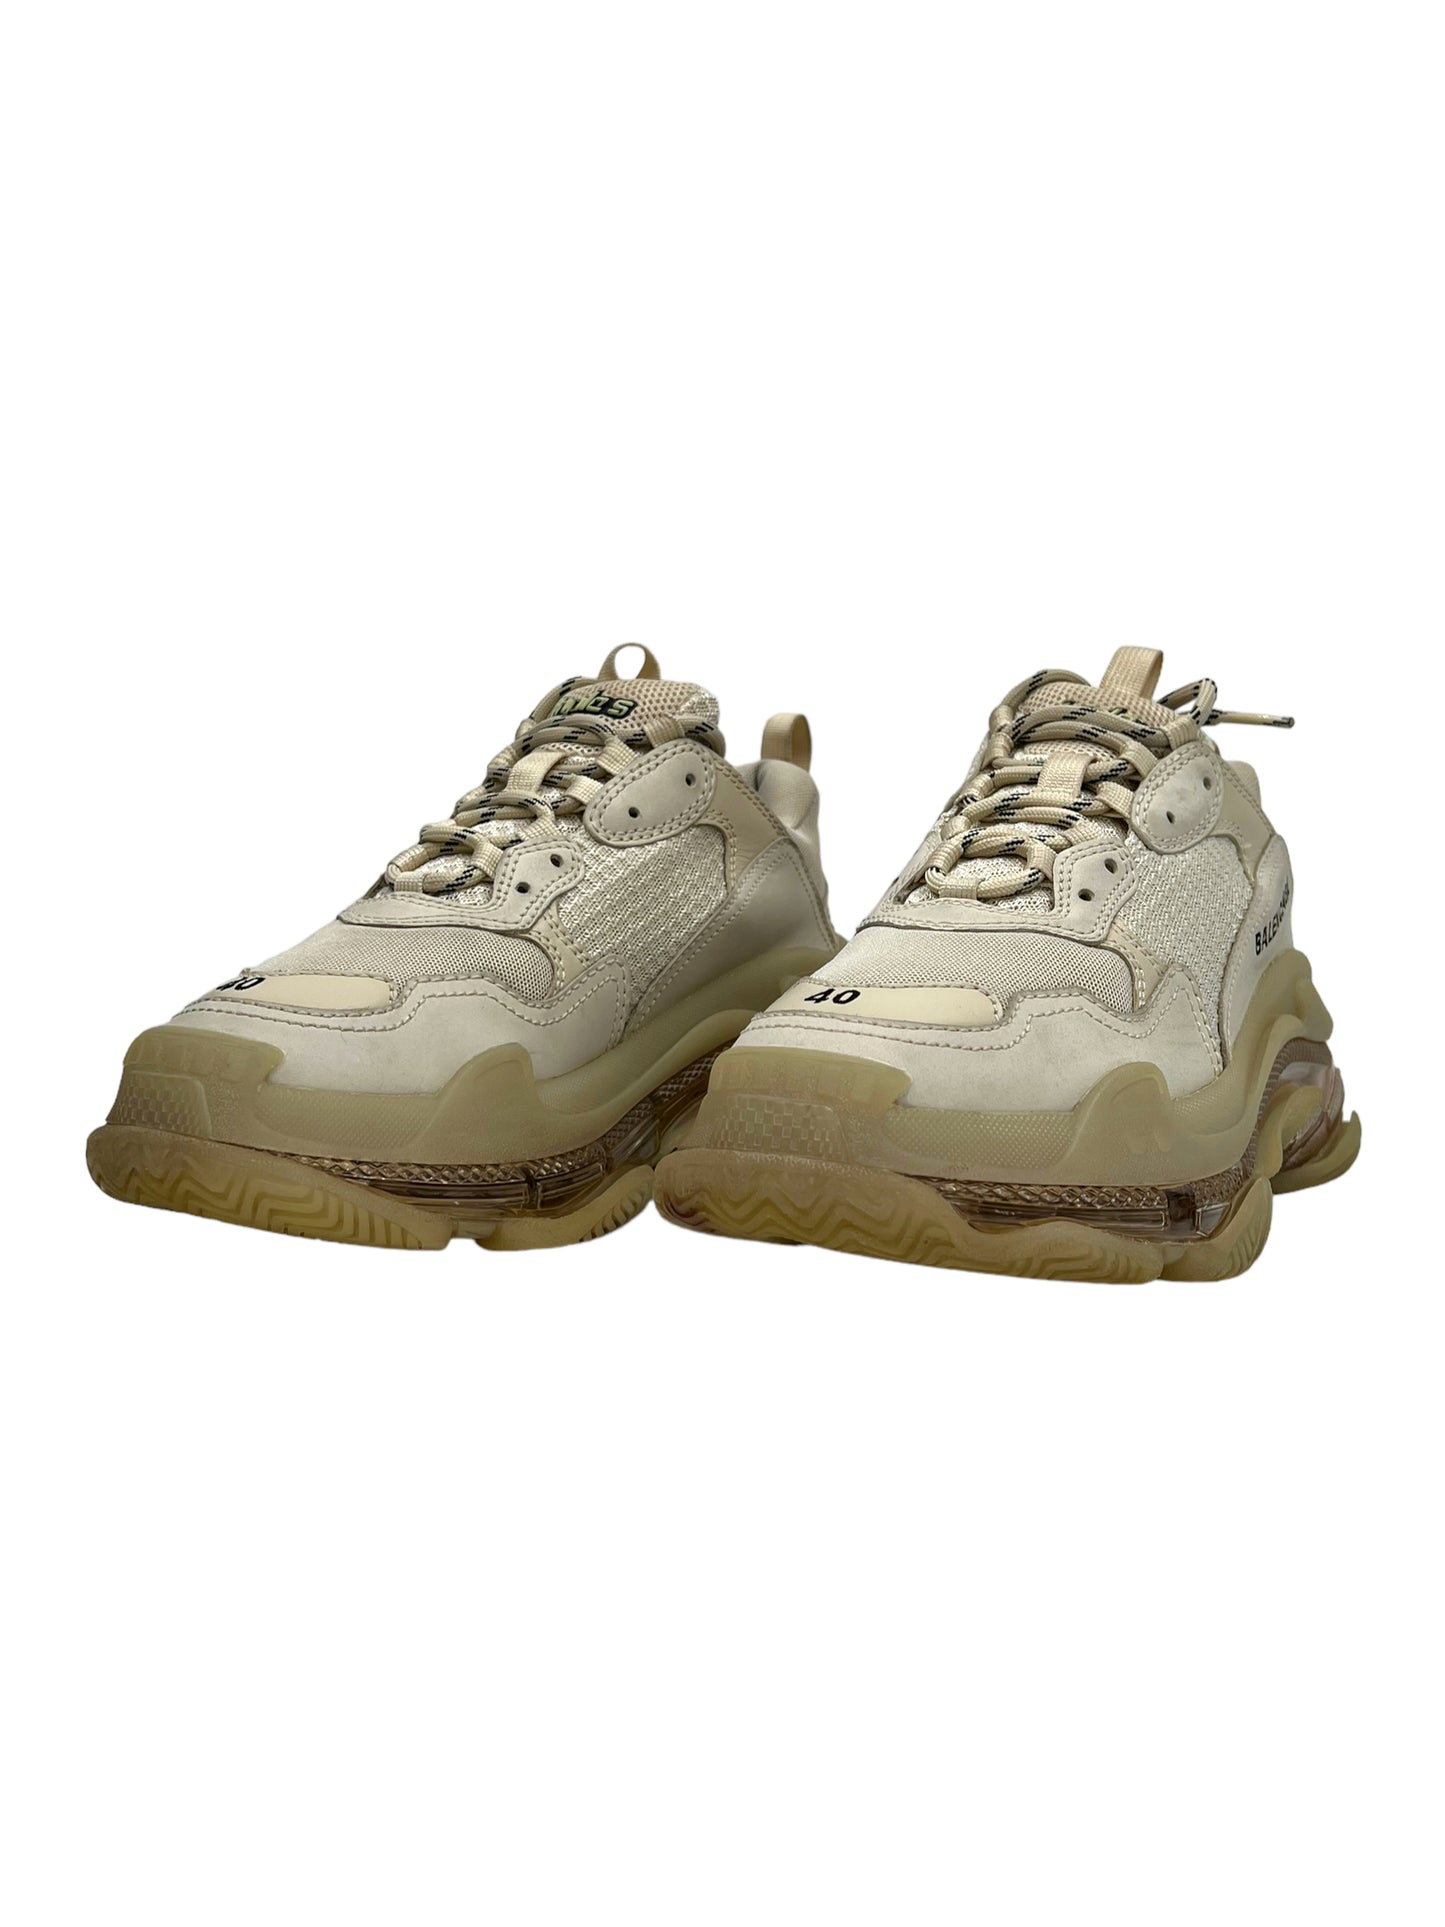 Balenciaga Triple S Trainers Off White Clear Sole- Genuine Design Luxury Consignment for Men. New & Pre-Owned Clothing, Shoes, & Accessories. Calgary, Canada